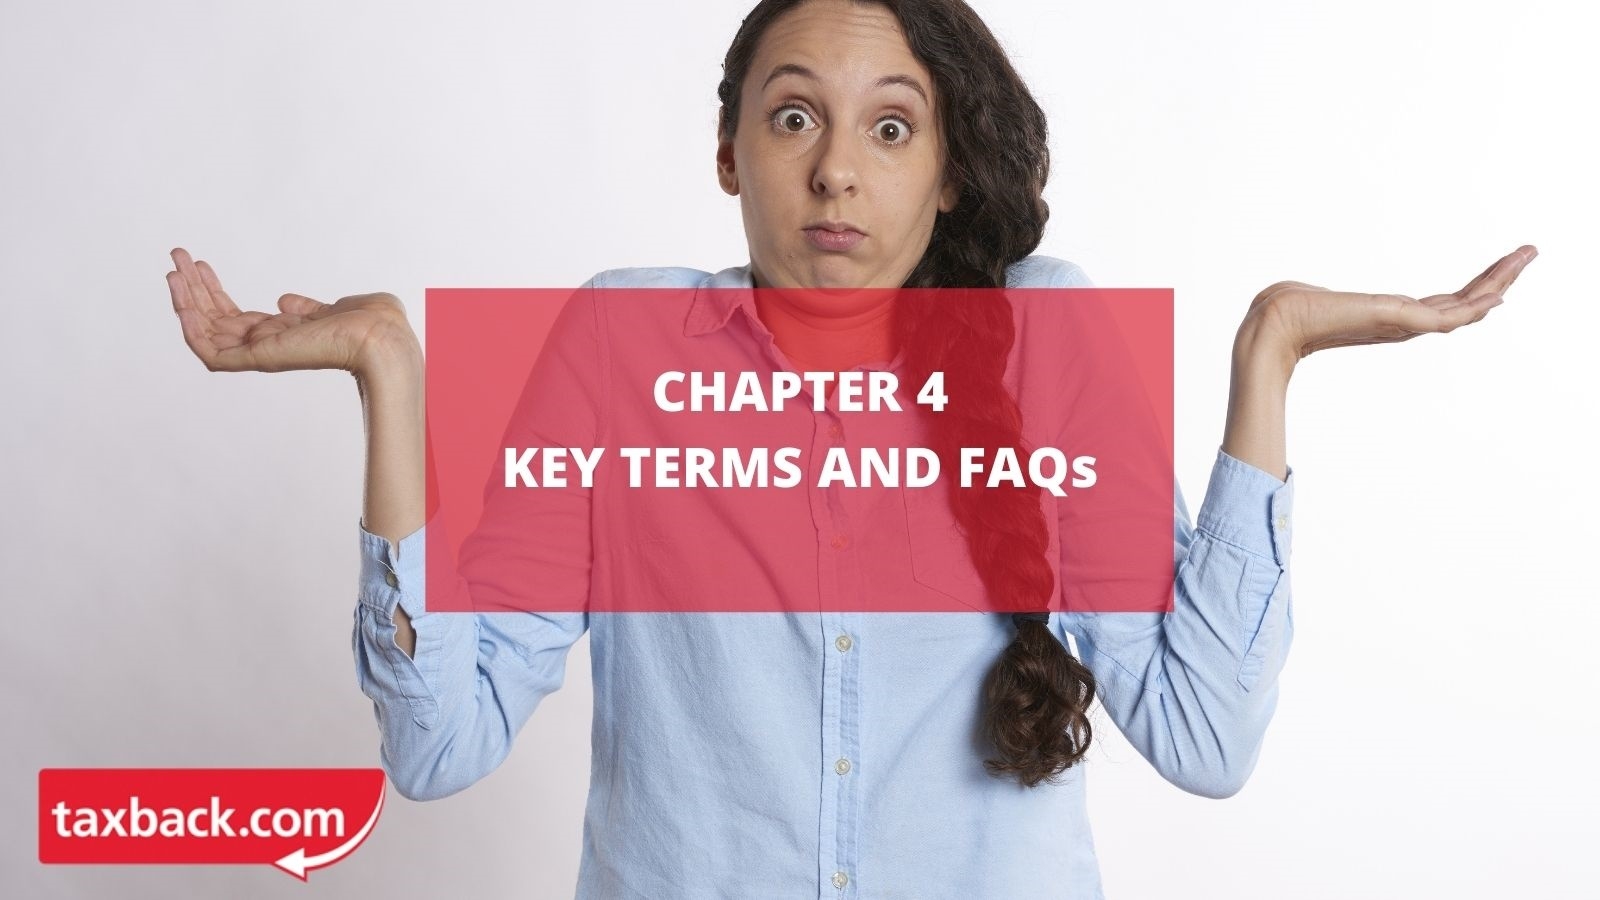 Chapter 4: Key Terms and FAQs